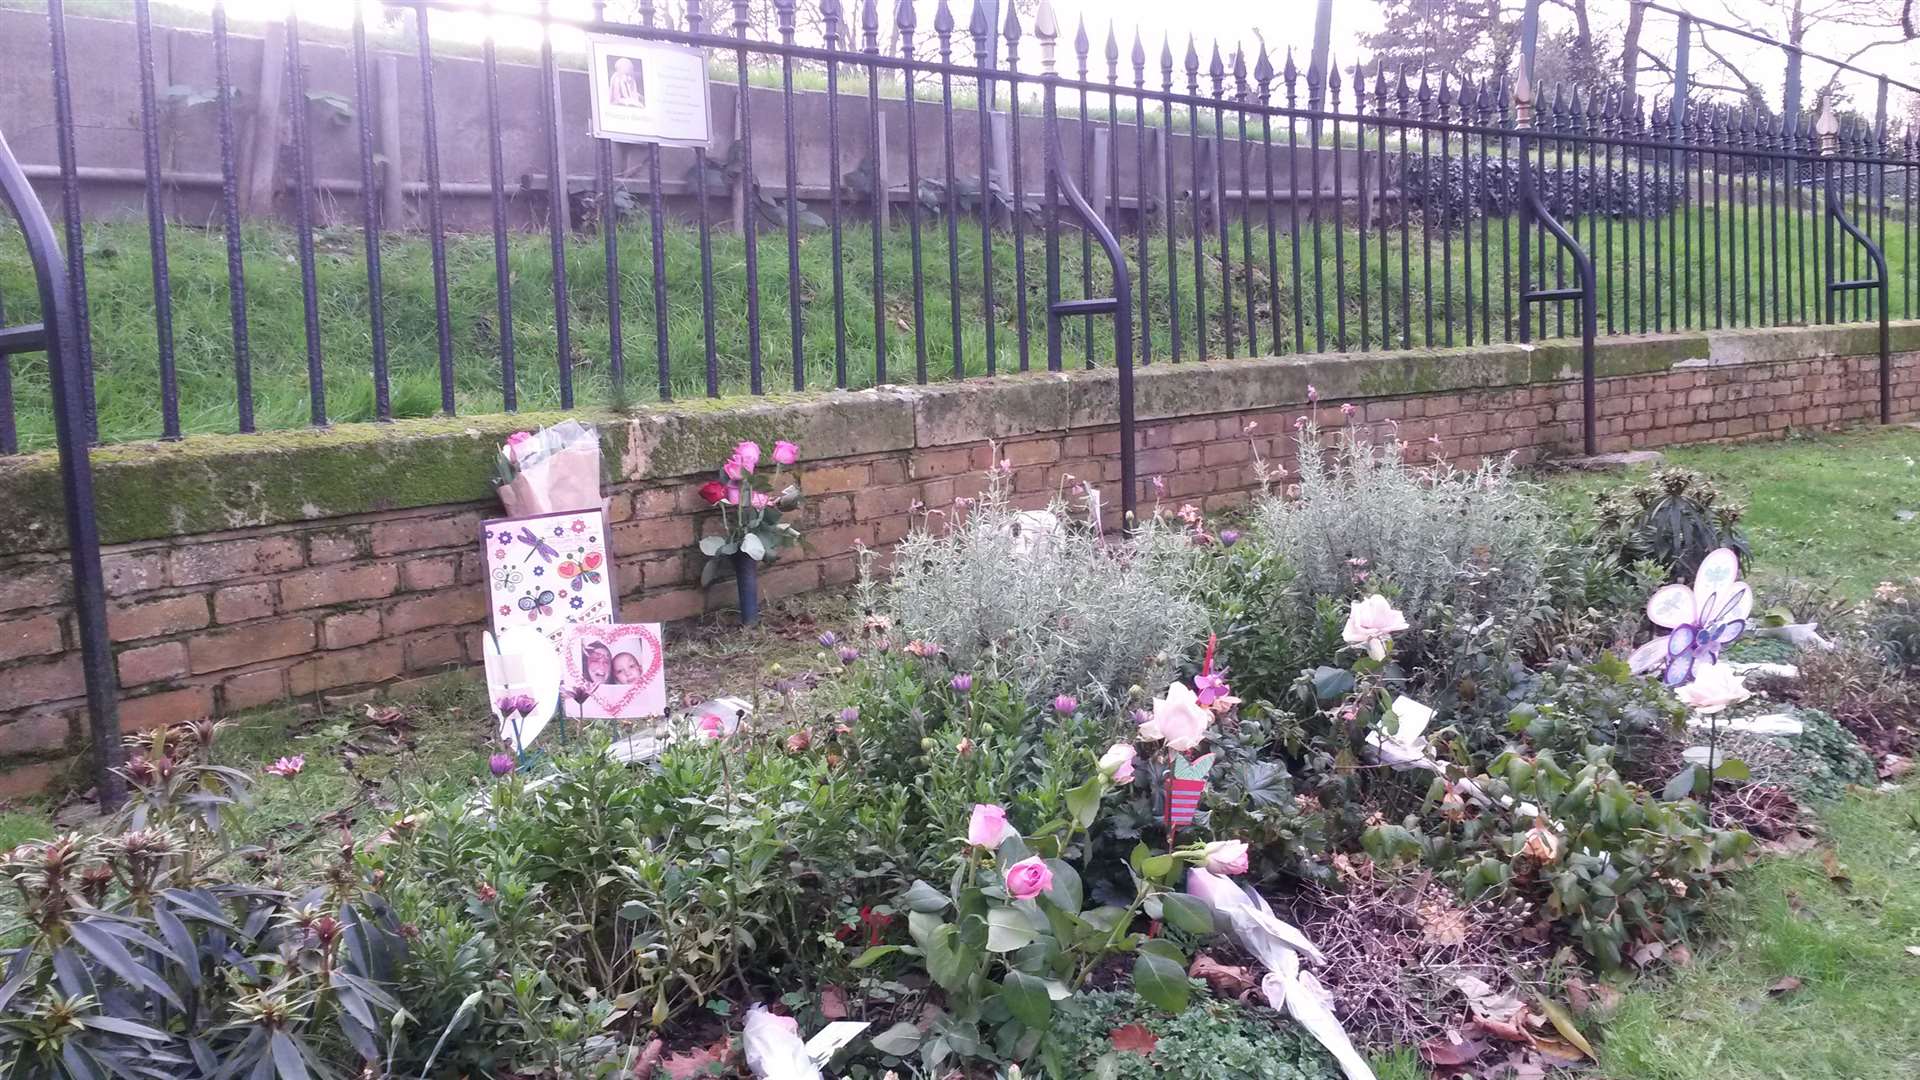 Family and friends left their tributes to Stacey to mark what would have been her 10th birthday